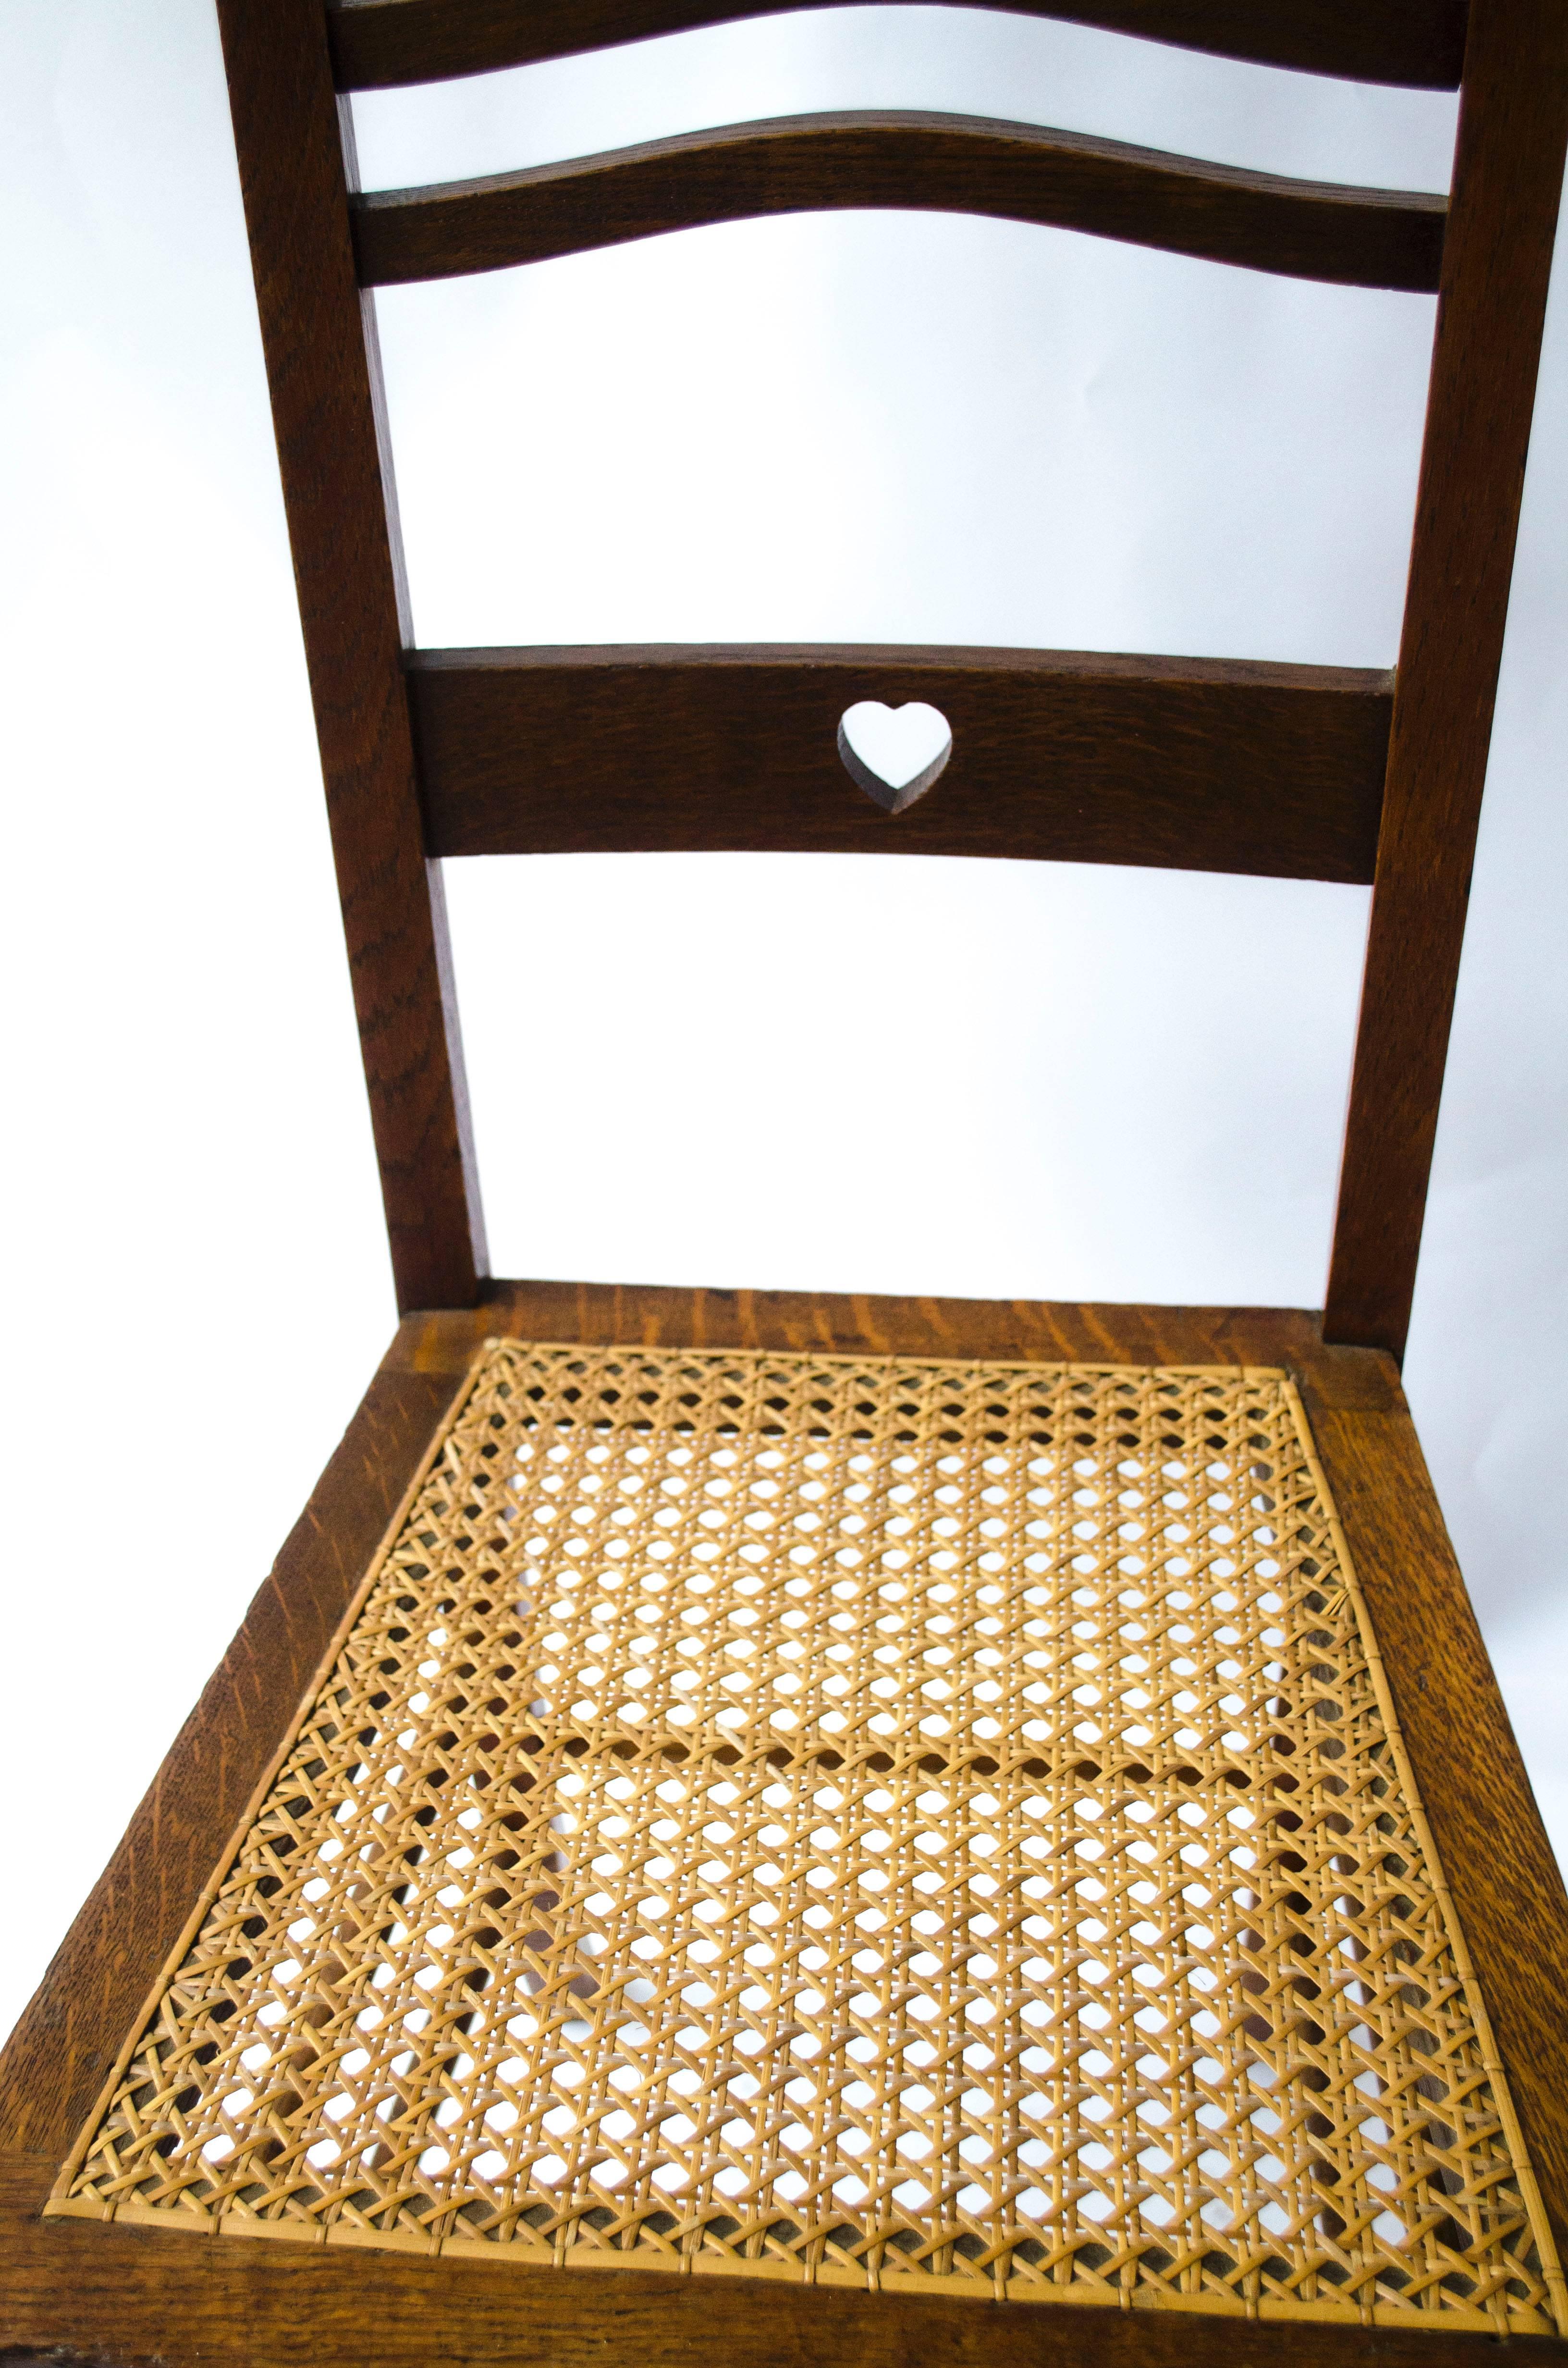 Shapland & Petter An Arts & Crafts Inlaid Oak Side Chair with a Pierced Heart In Good Condition For Sale In London, GB